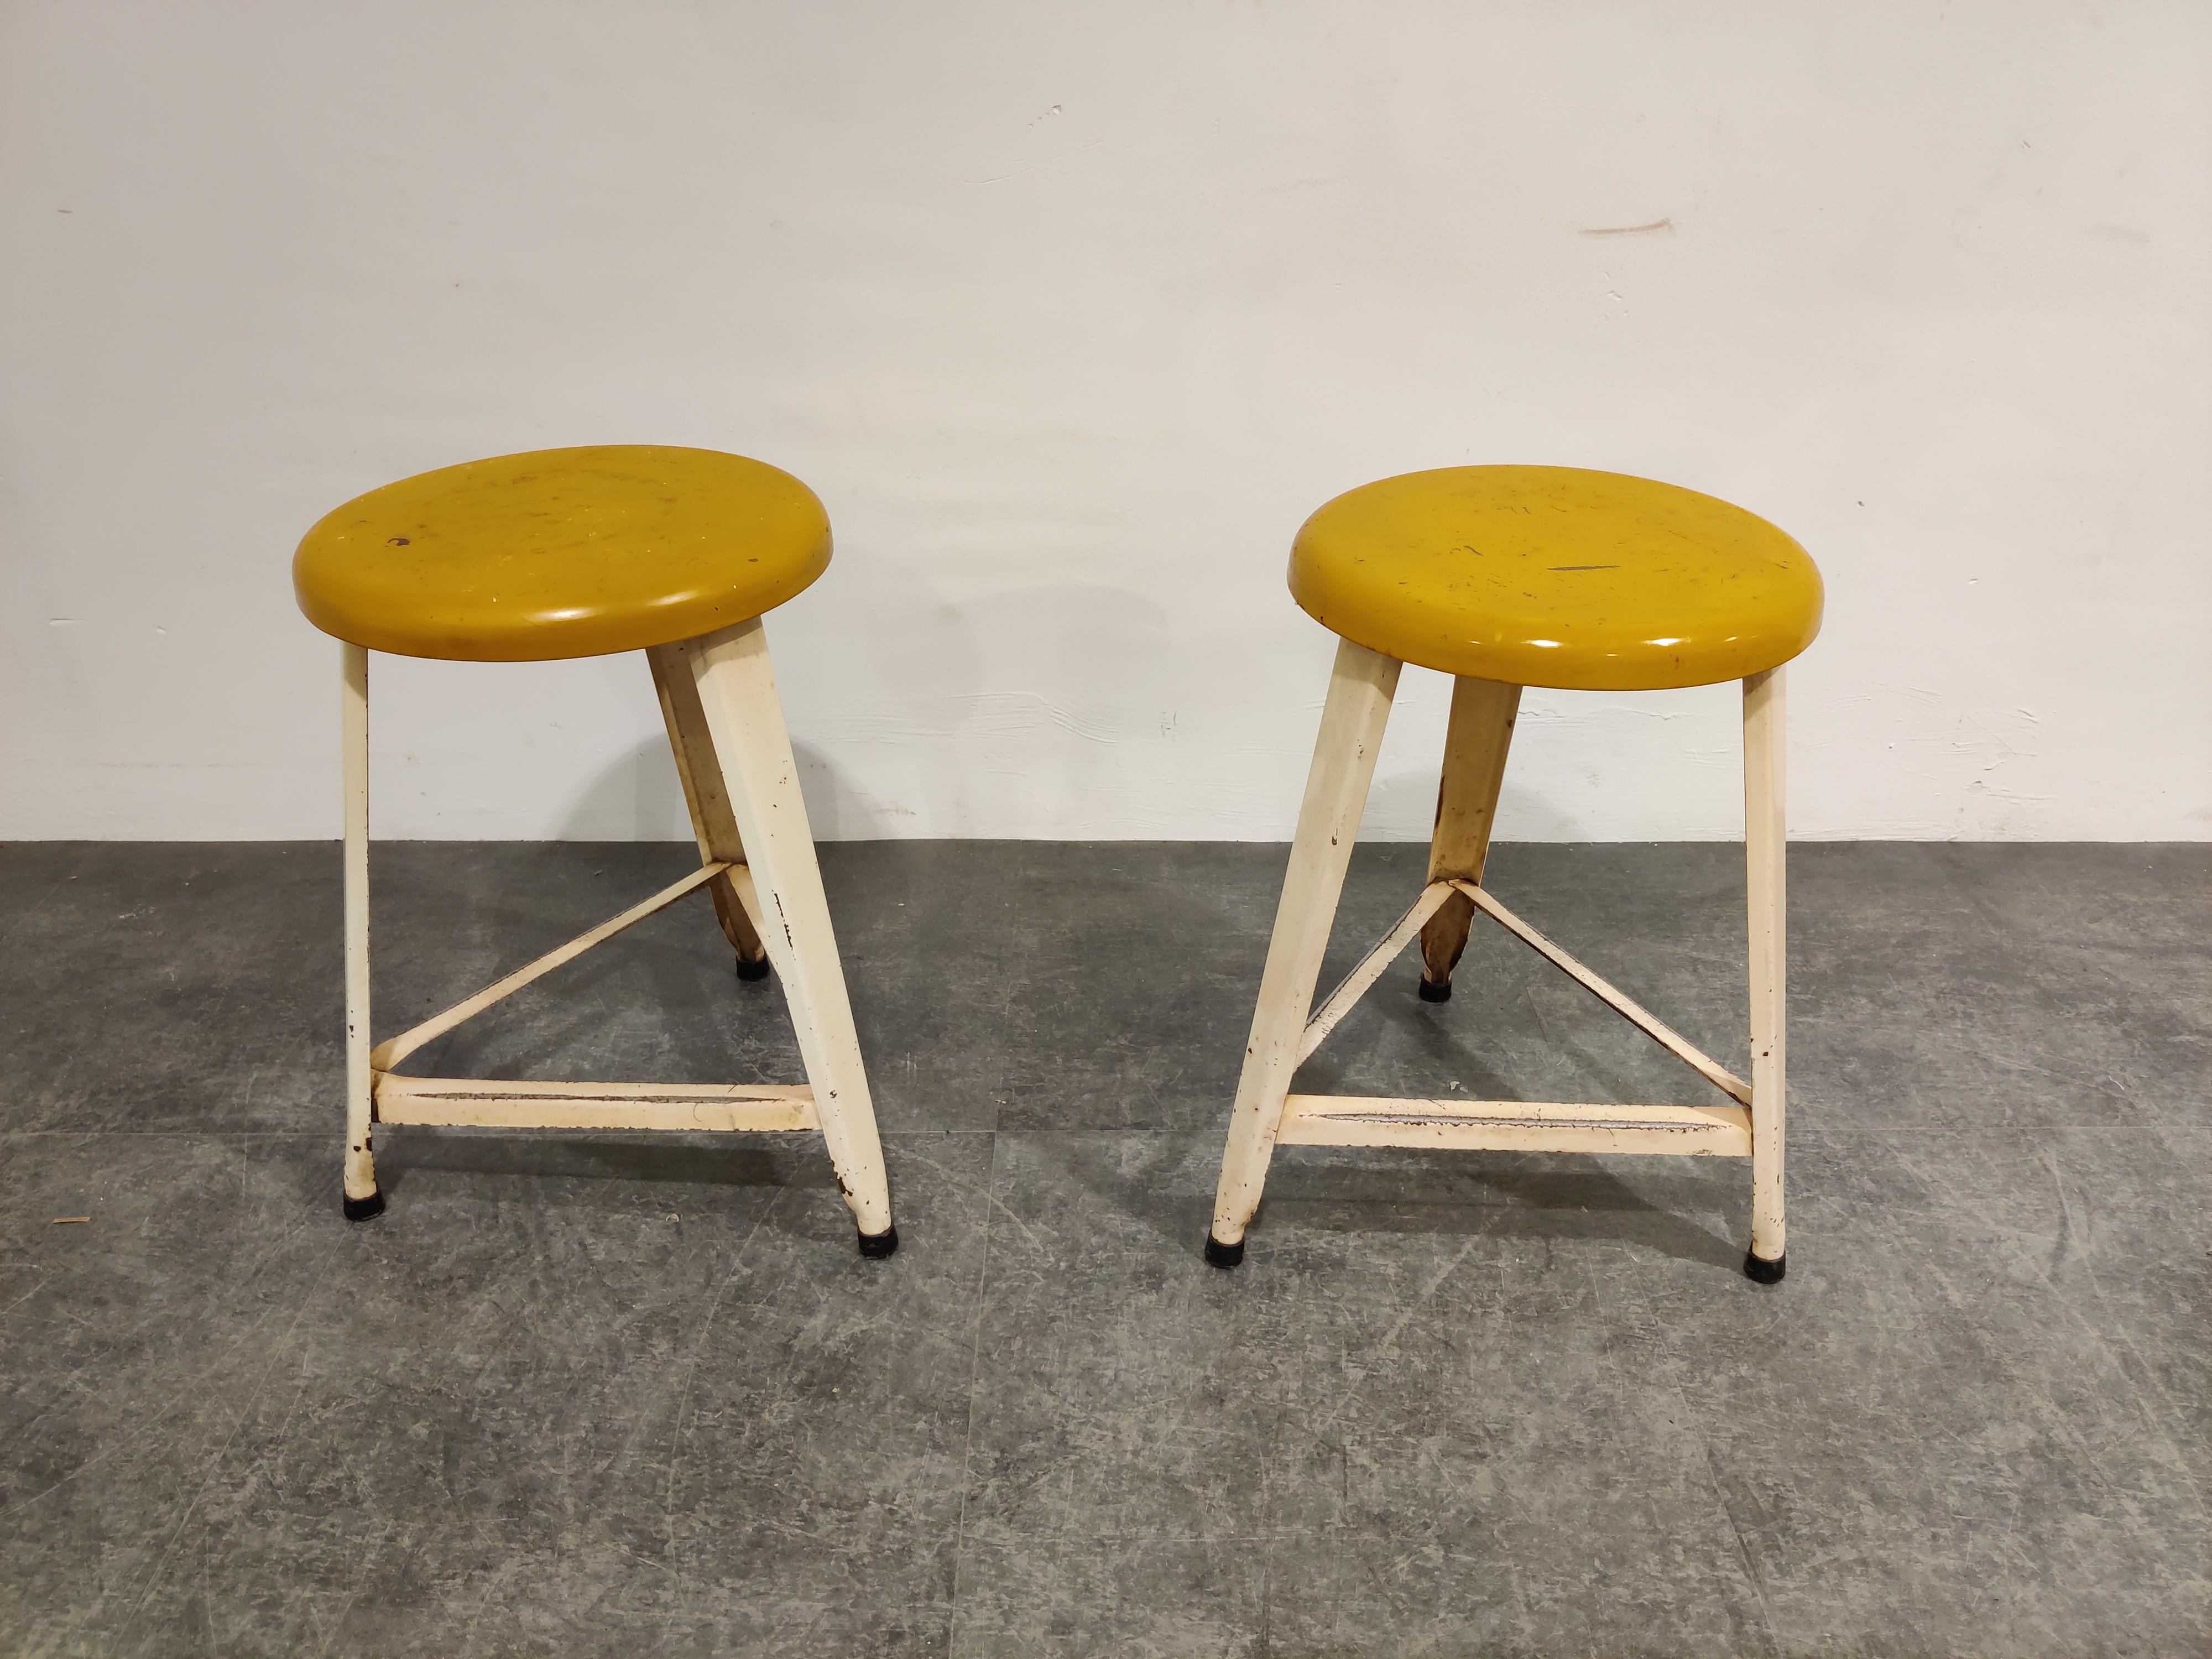 A pair of simple, honest industrial stools with a tripod aluminum base and yellow seat.

Good original condition with a nice original look.

1960s - Netherlands

Dimensions:
Height: 50cm/19.68